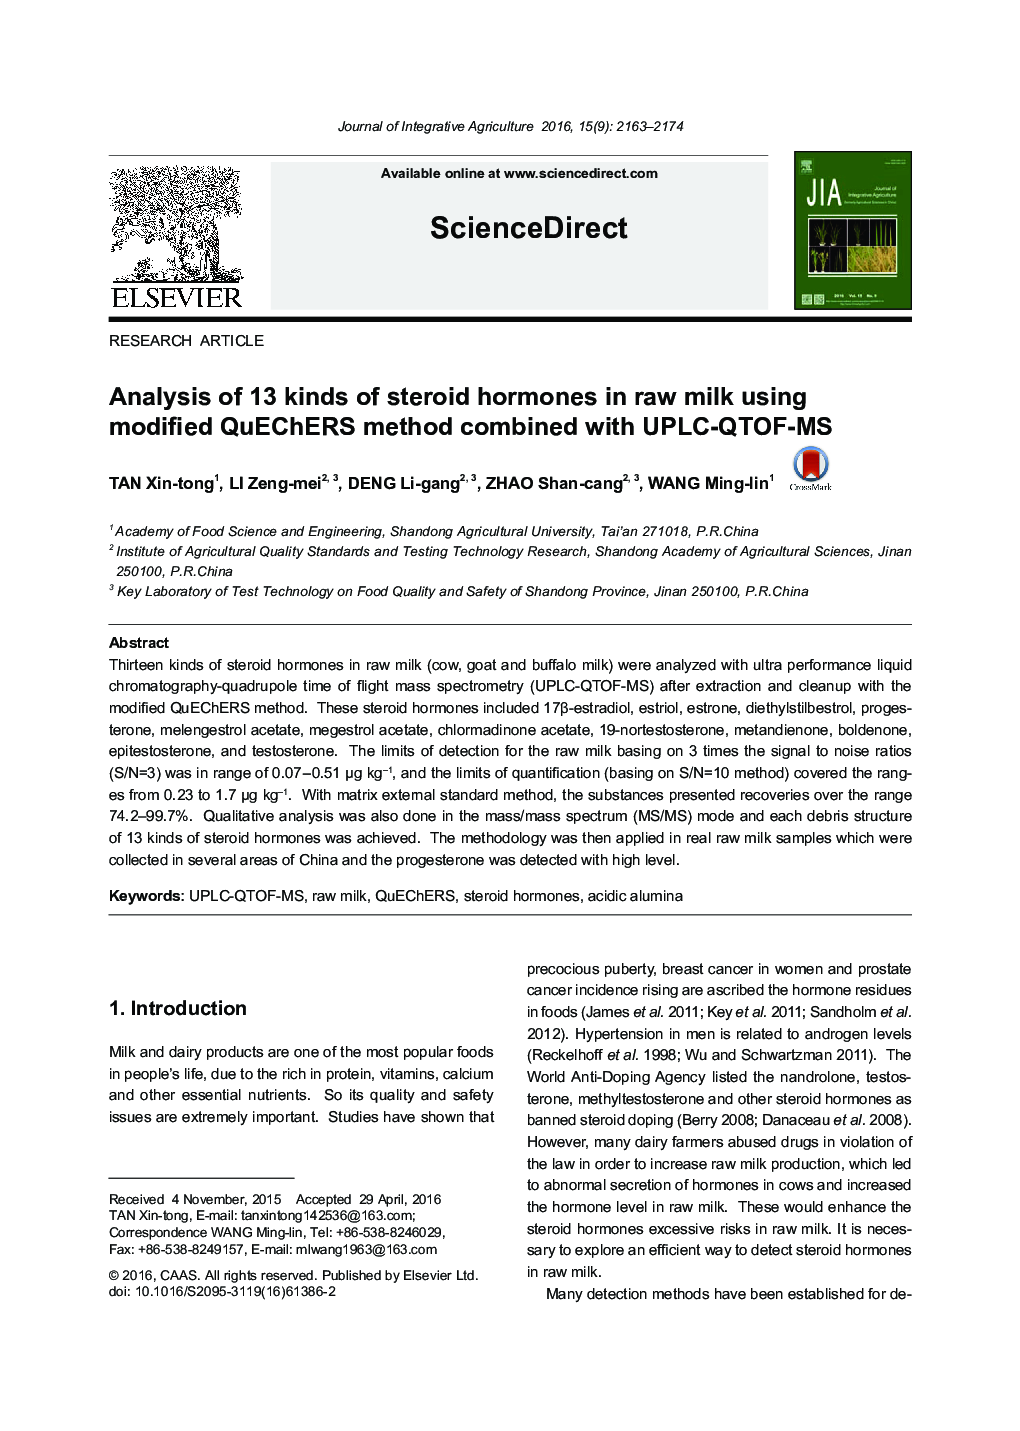 Analysis of 13 kinds of steroid hormones in raw milk using modified QuEChERS method combined with UPLC-QTOF-MS